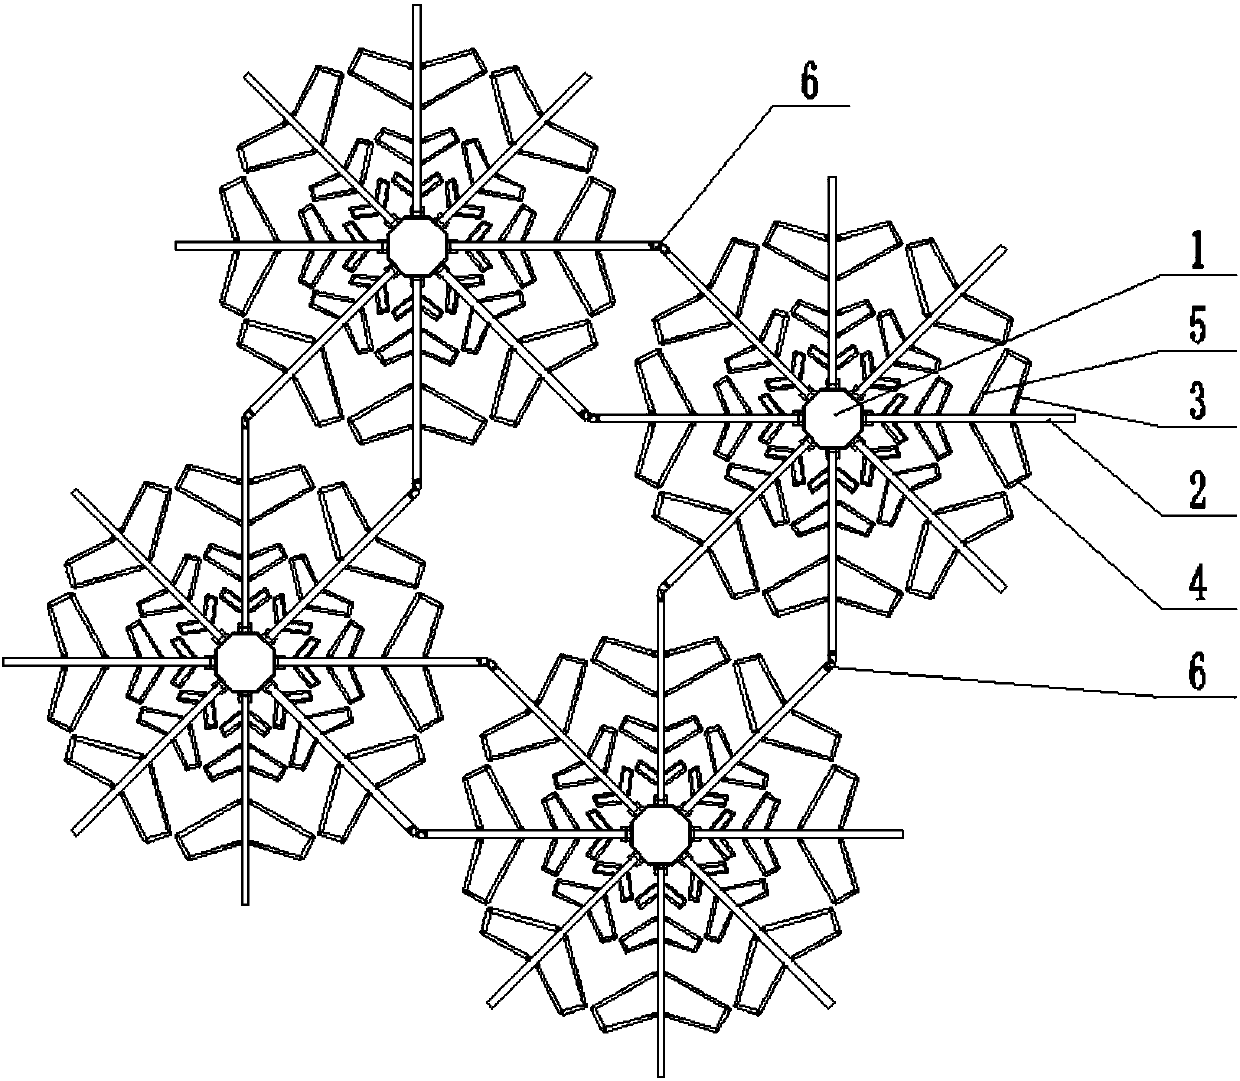 Sensitive plant simulating variable topology folding and unfolding mechanism employing rigidity hinge connection